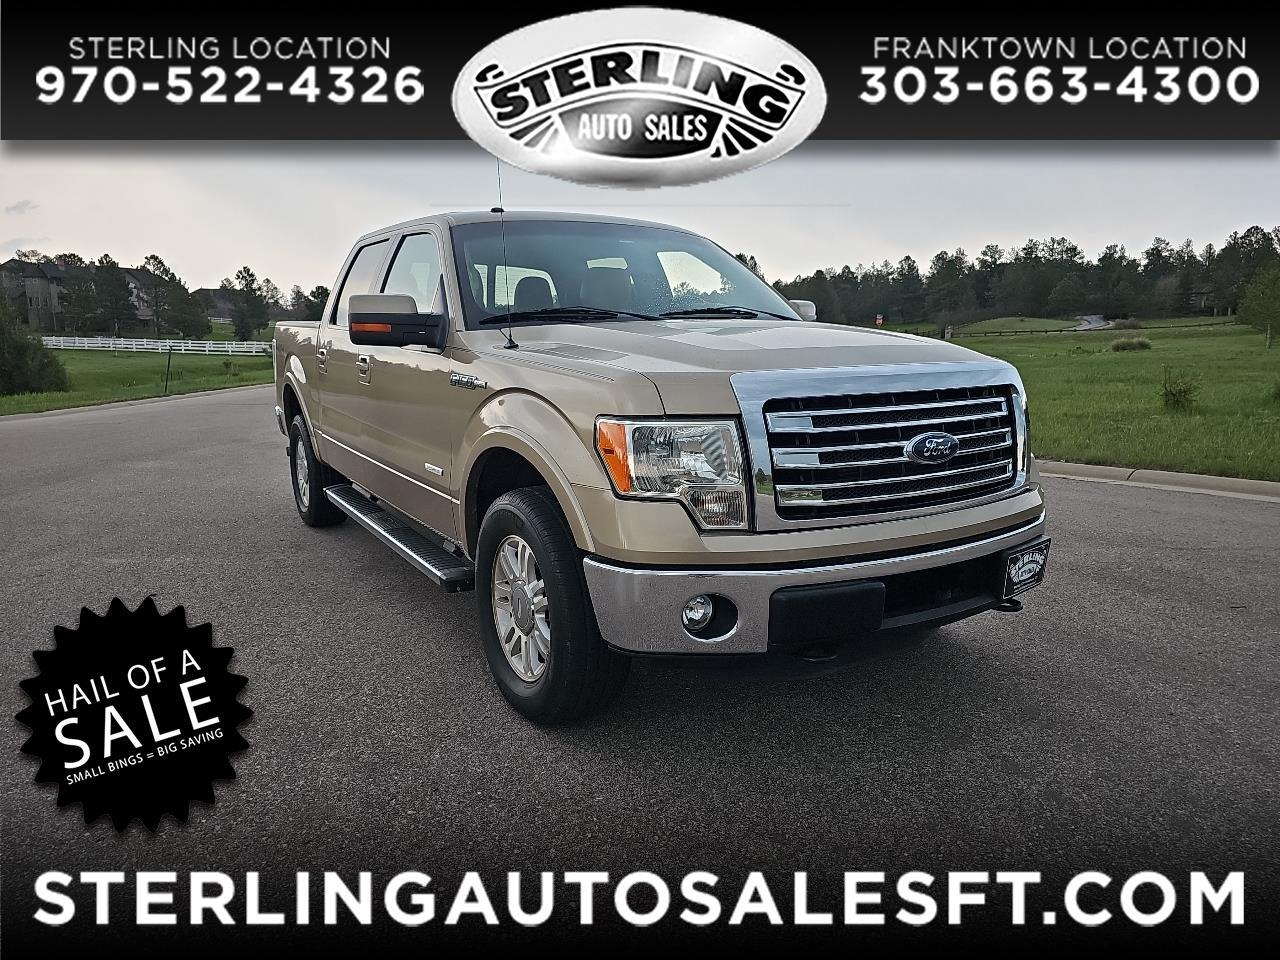 Ford F-150 4WD SuperCrew 157" Lariat w/HD Payload Pkg 2013